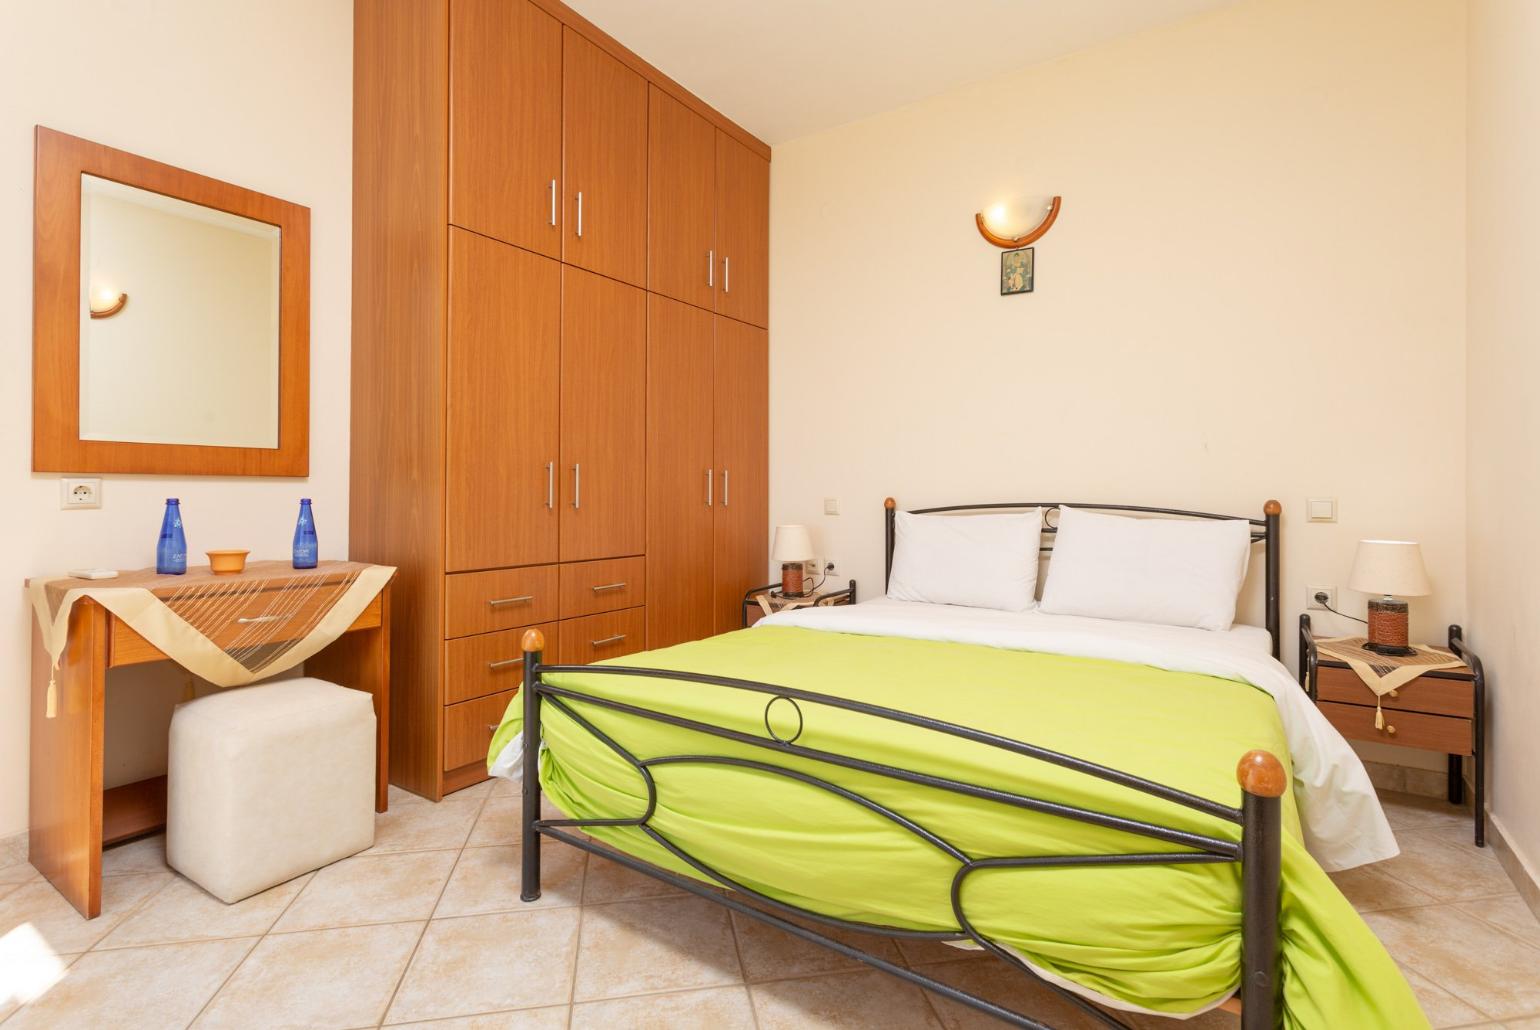 Double bedroom on ground floor with en suite bathroom, A/C, and terrace access with sea views